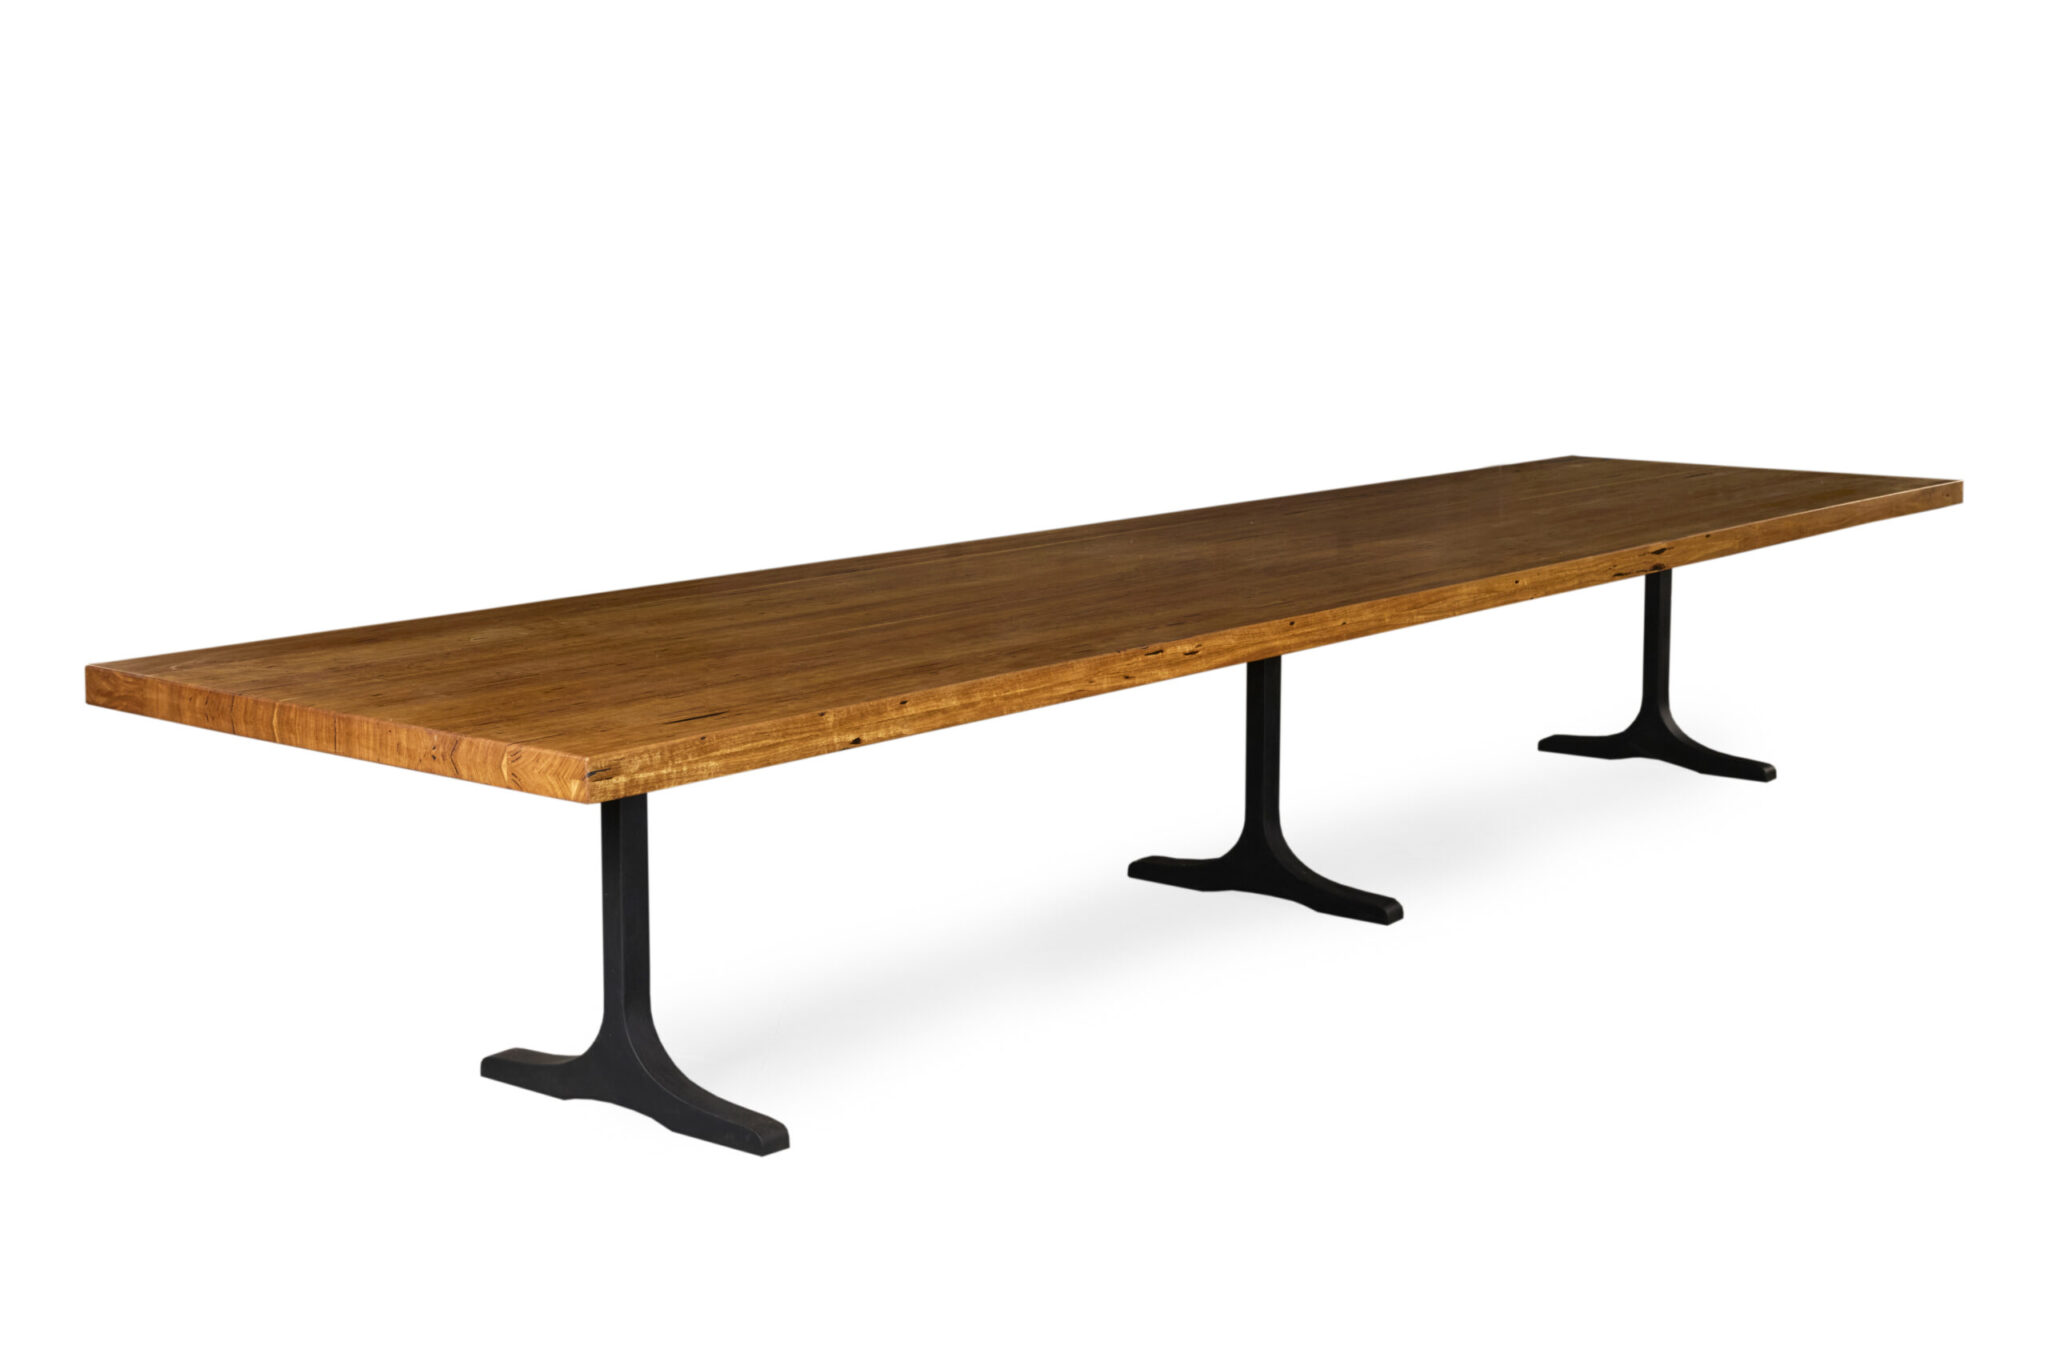 Arranmore Furniture presents Rose Bay Dining Table Custom Edge Victorian Ash timber with I Beam Black Steel base Ideal for gatherings Handcrafted excellence